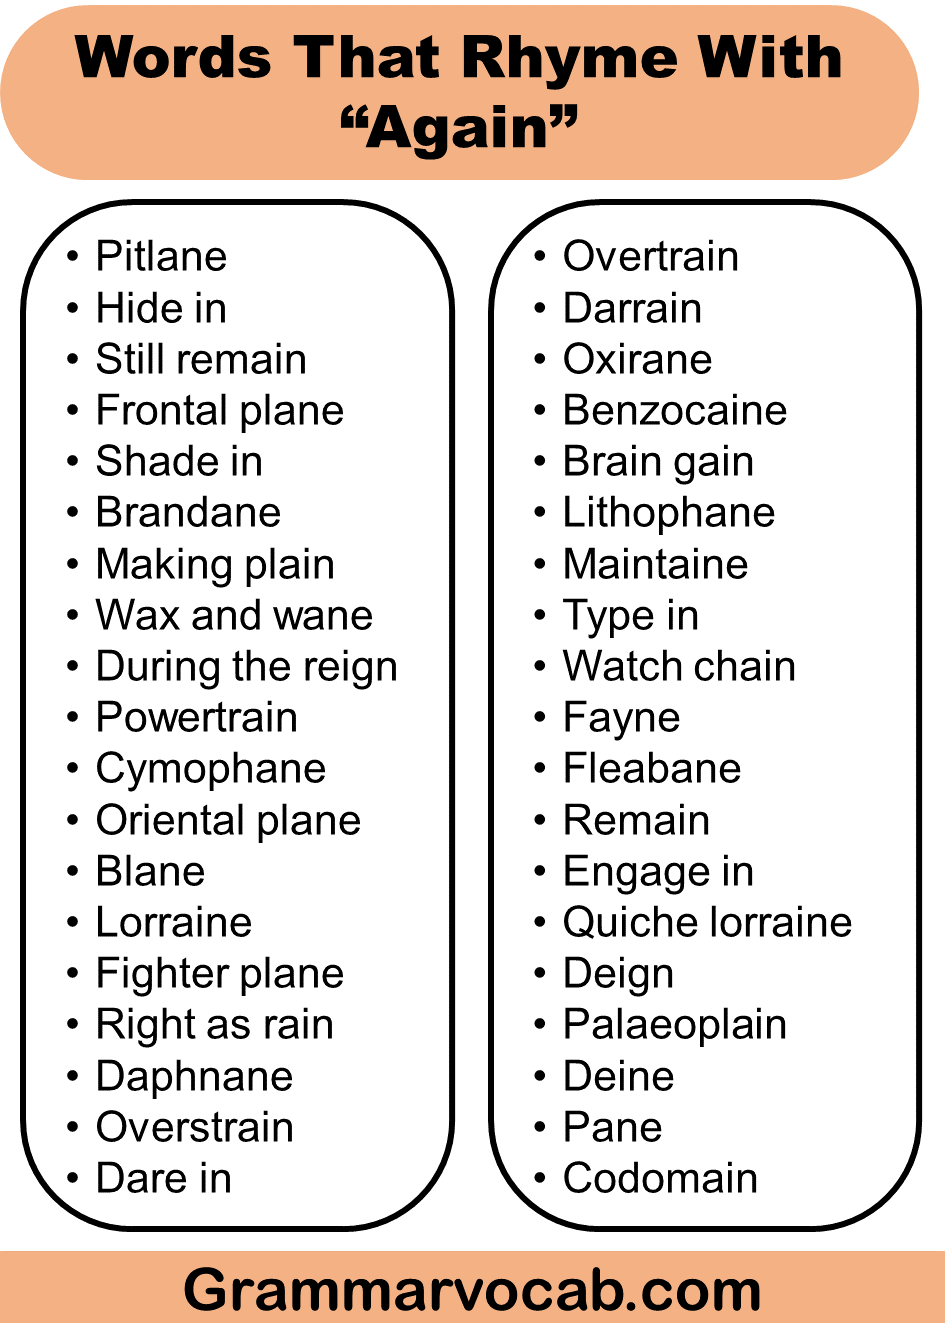 List of Words That Rhyme With Again